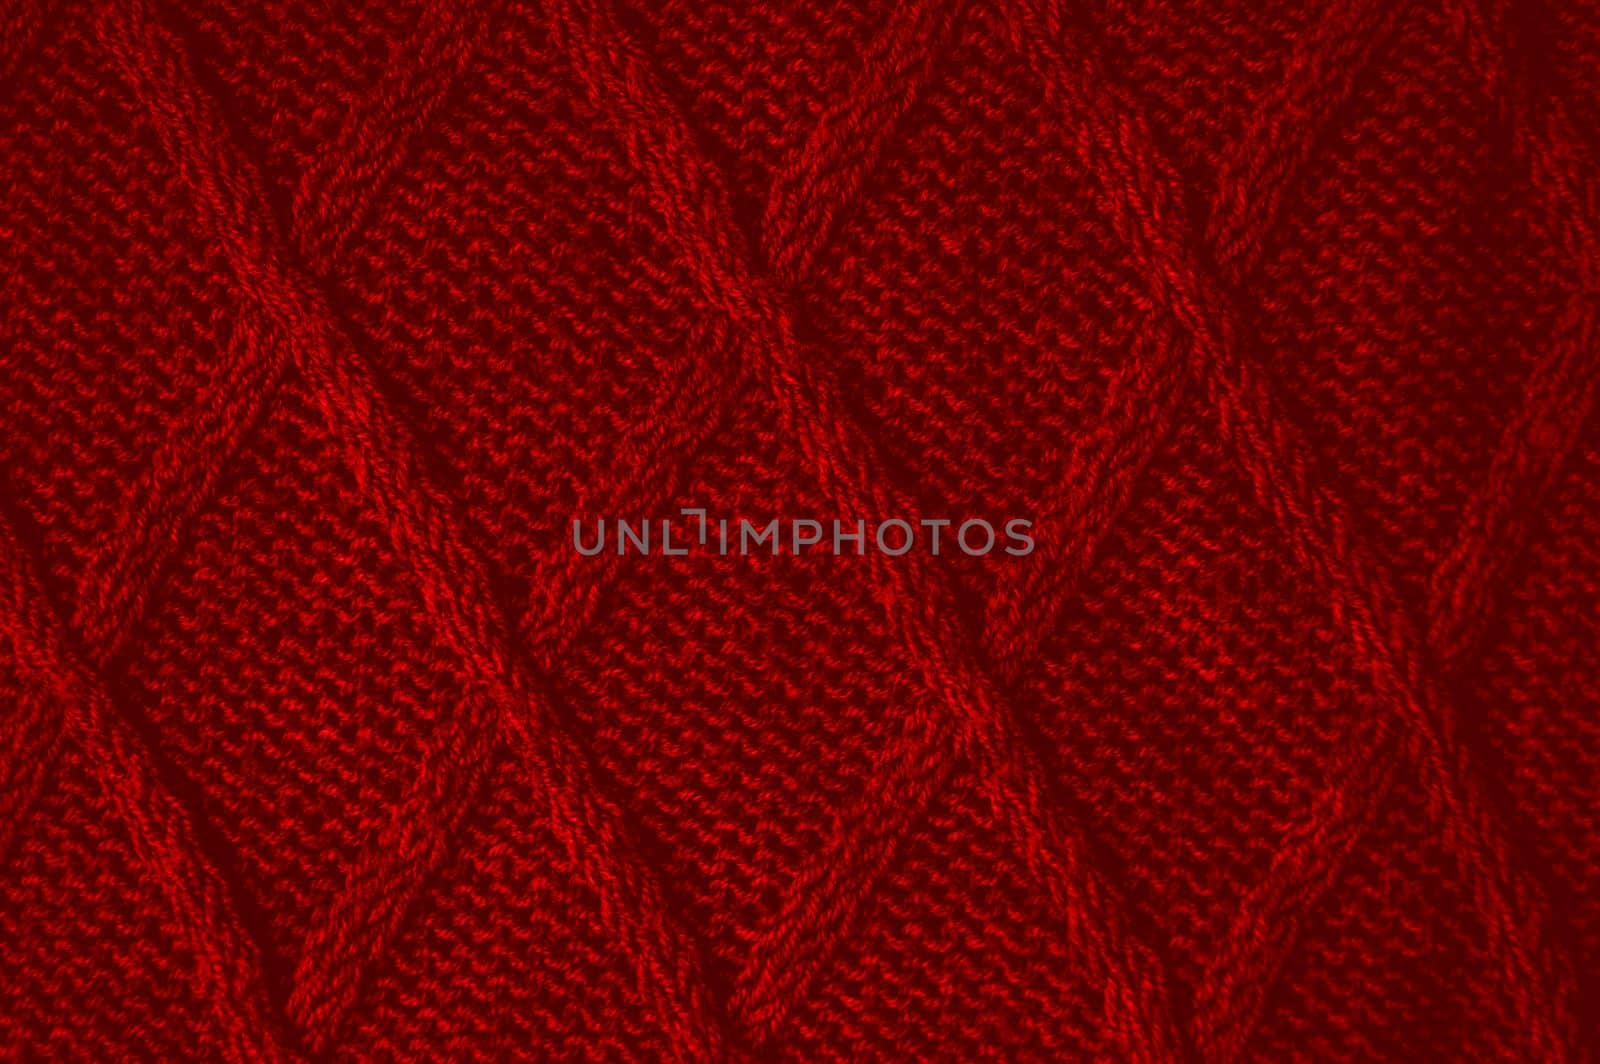 Knitted Fabric. Organic Woven Pullover. Closeup Knitwear Winter Background. Detail Knitted Wool. Red Macro Thread. Scandinavian Xmas Cloth. Cotton Decor Material. Linen Abstract Wool.